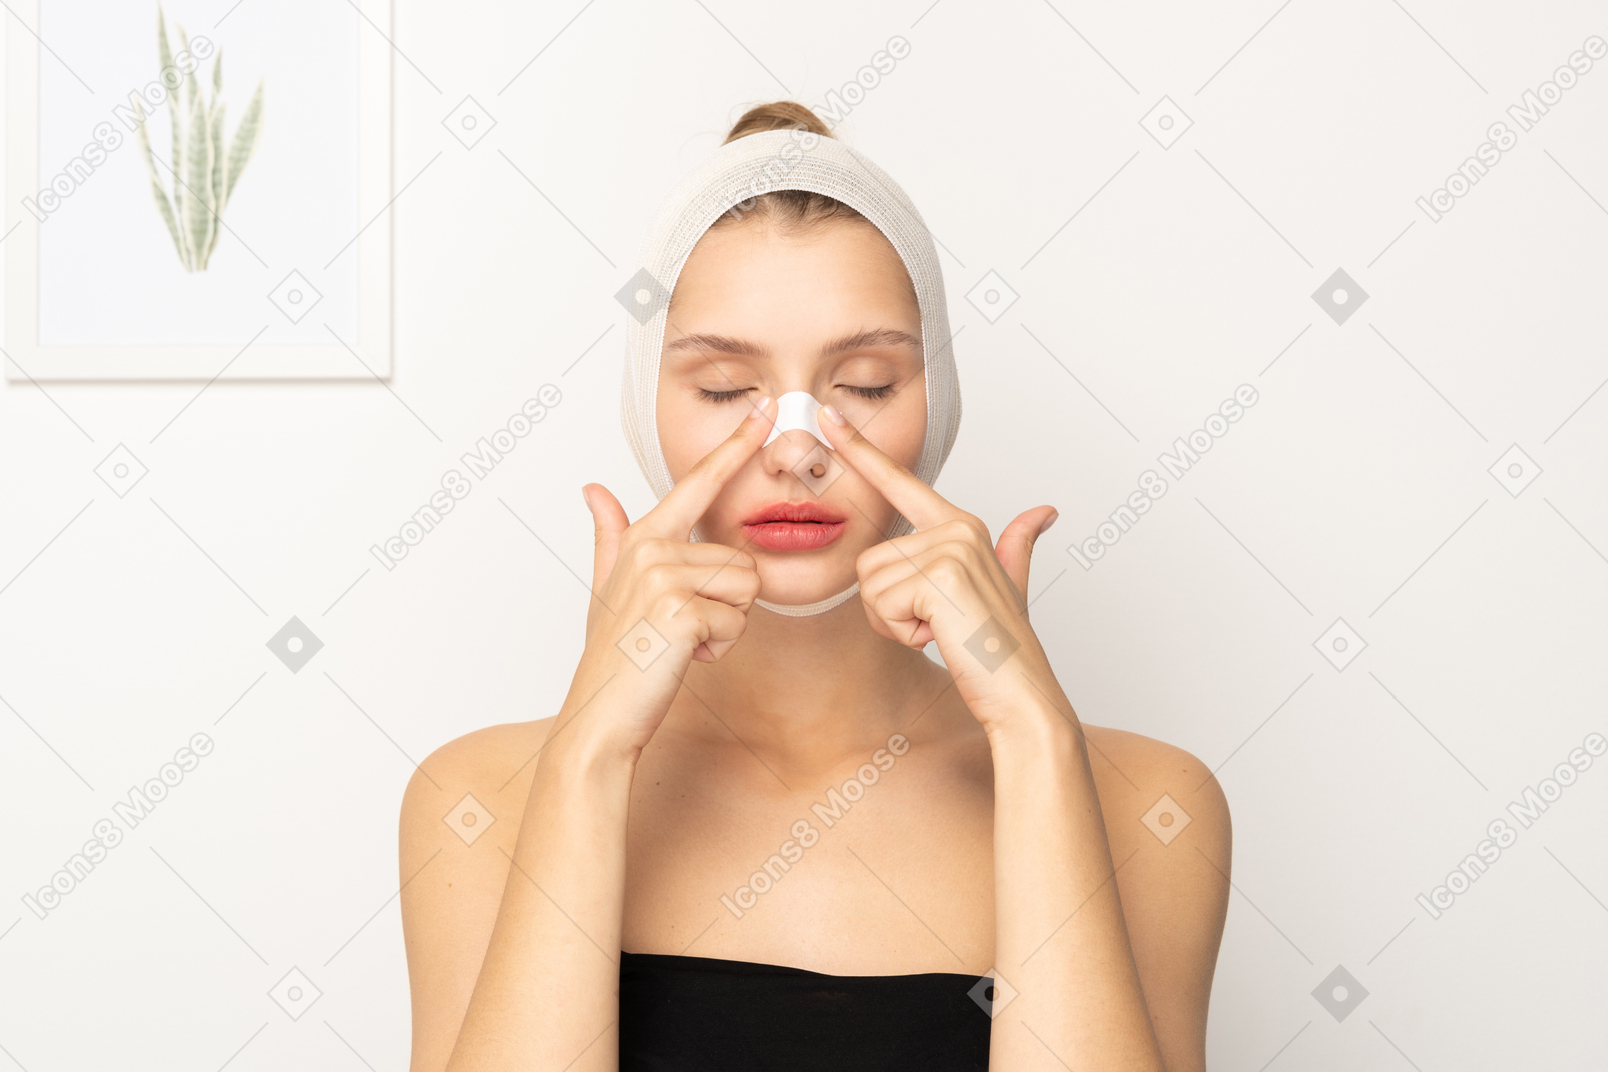 Woman with head bandage placing plaster on her nose